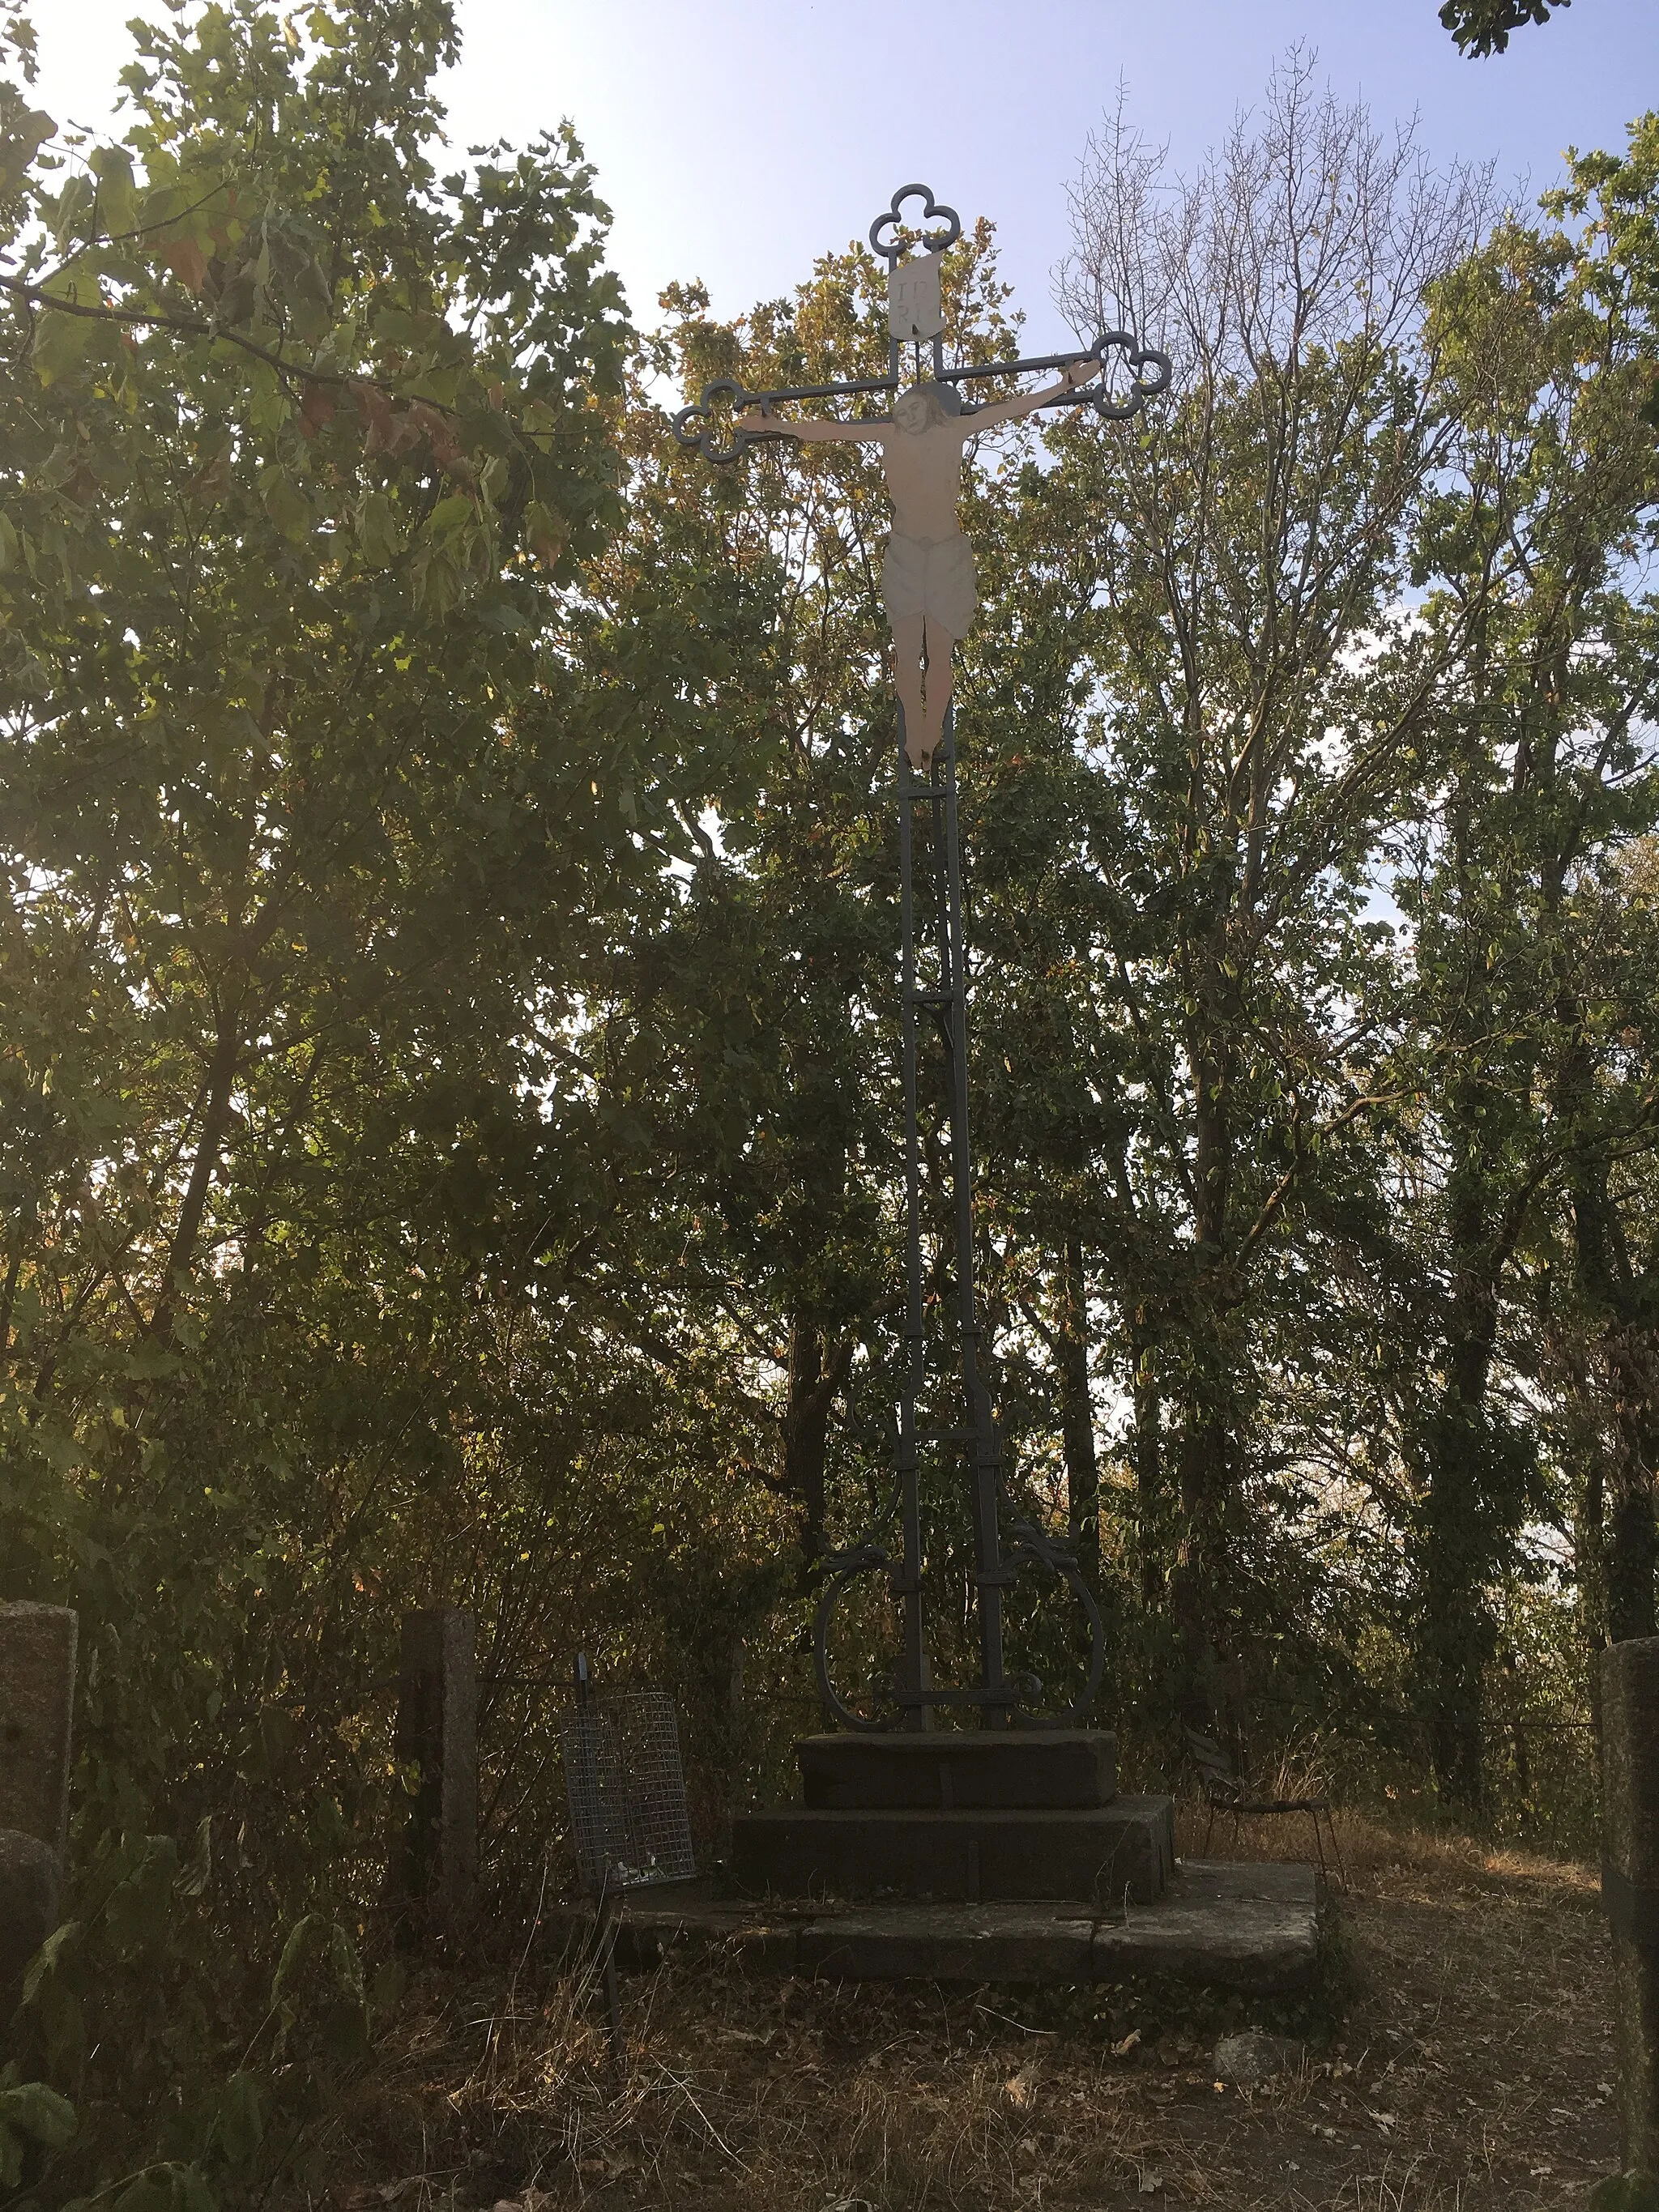 Photo showing: Pray cross in Gablenz, erected in 19th century; Local history of importance; cultural heritage monument